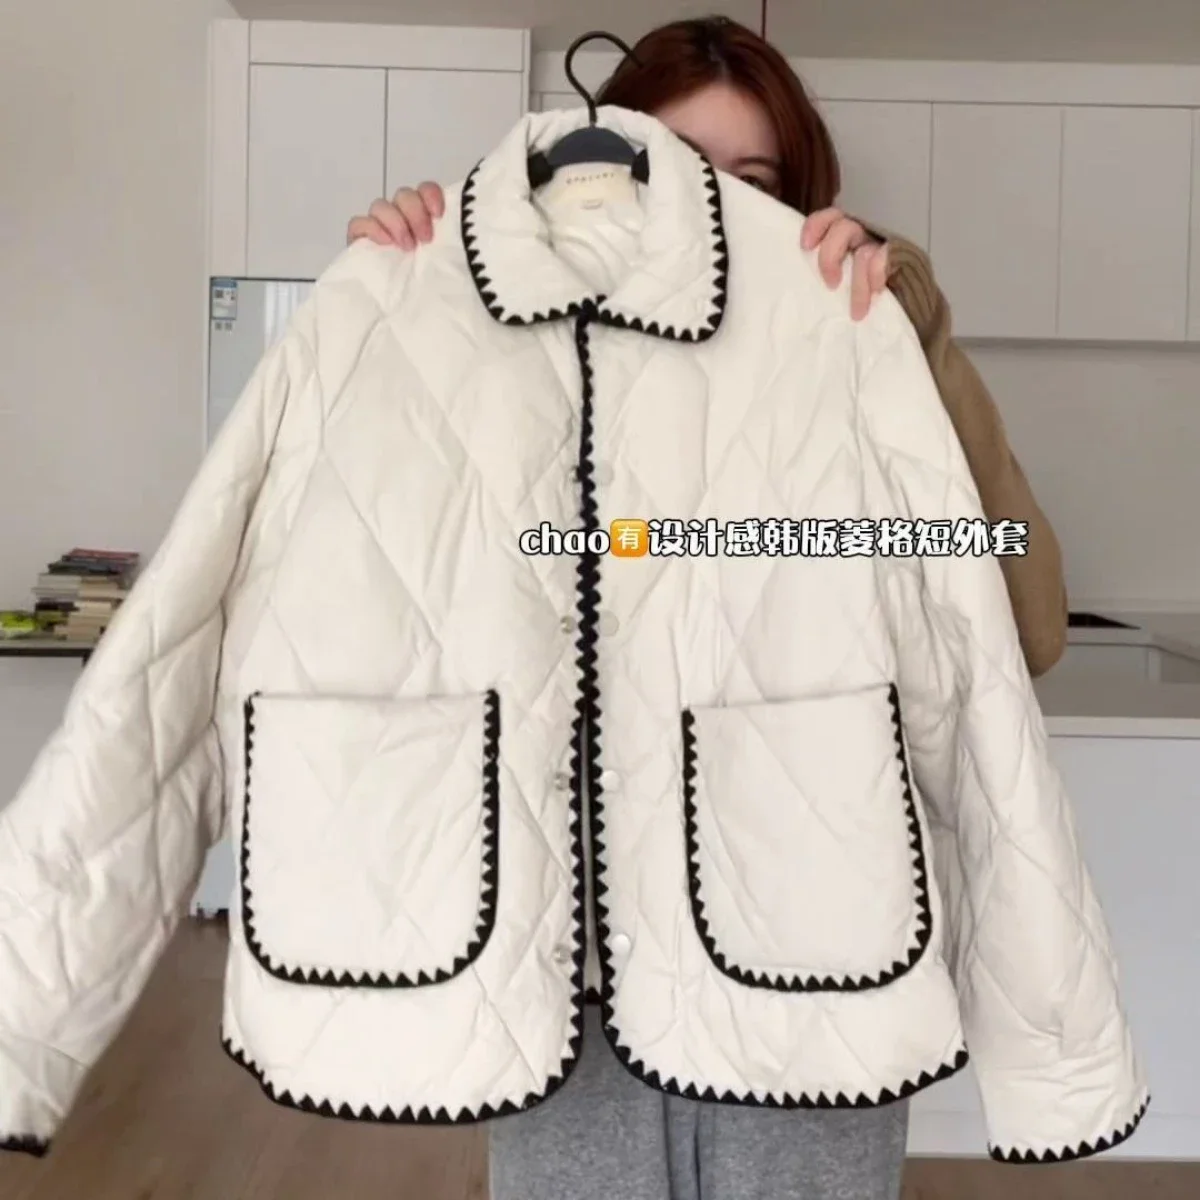 2022 Korean Version of The Simple and Fashionable Short Design Feeling Light Winter Cotton Clothes Cotton Coat Jacket Top Women